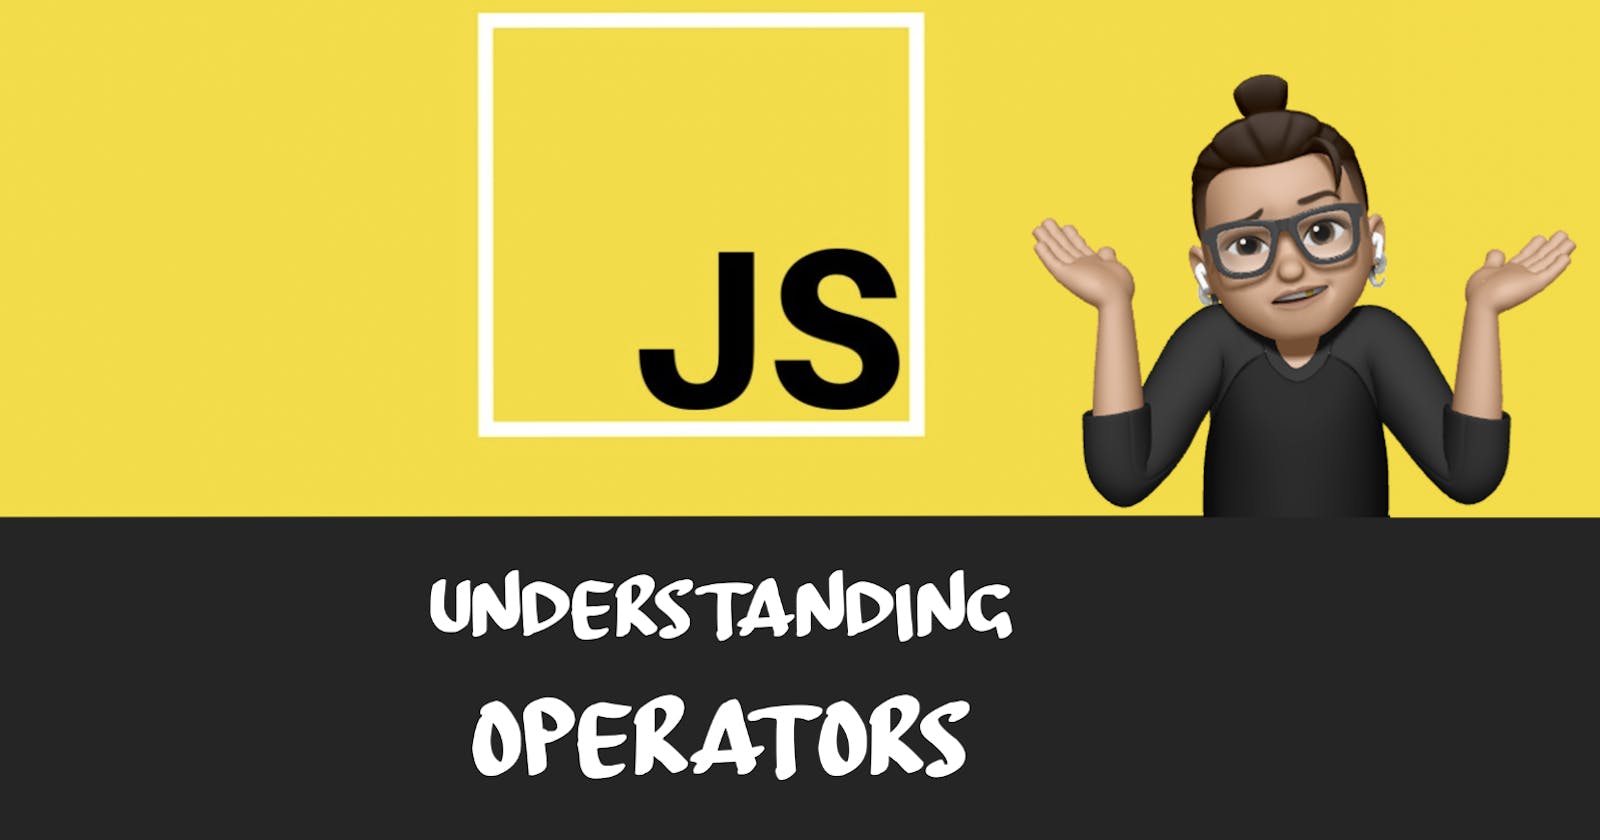 Javascript Operator Explained in Fewer than 5 minutes